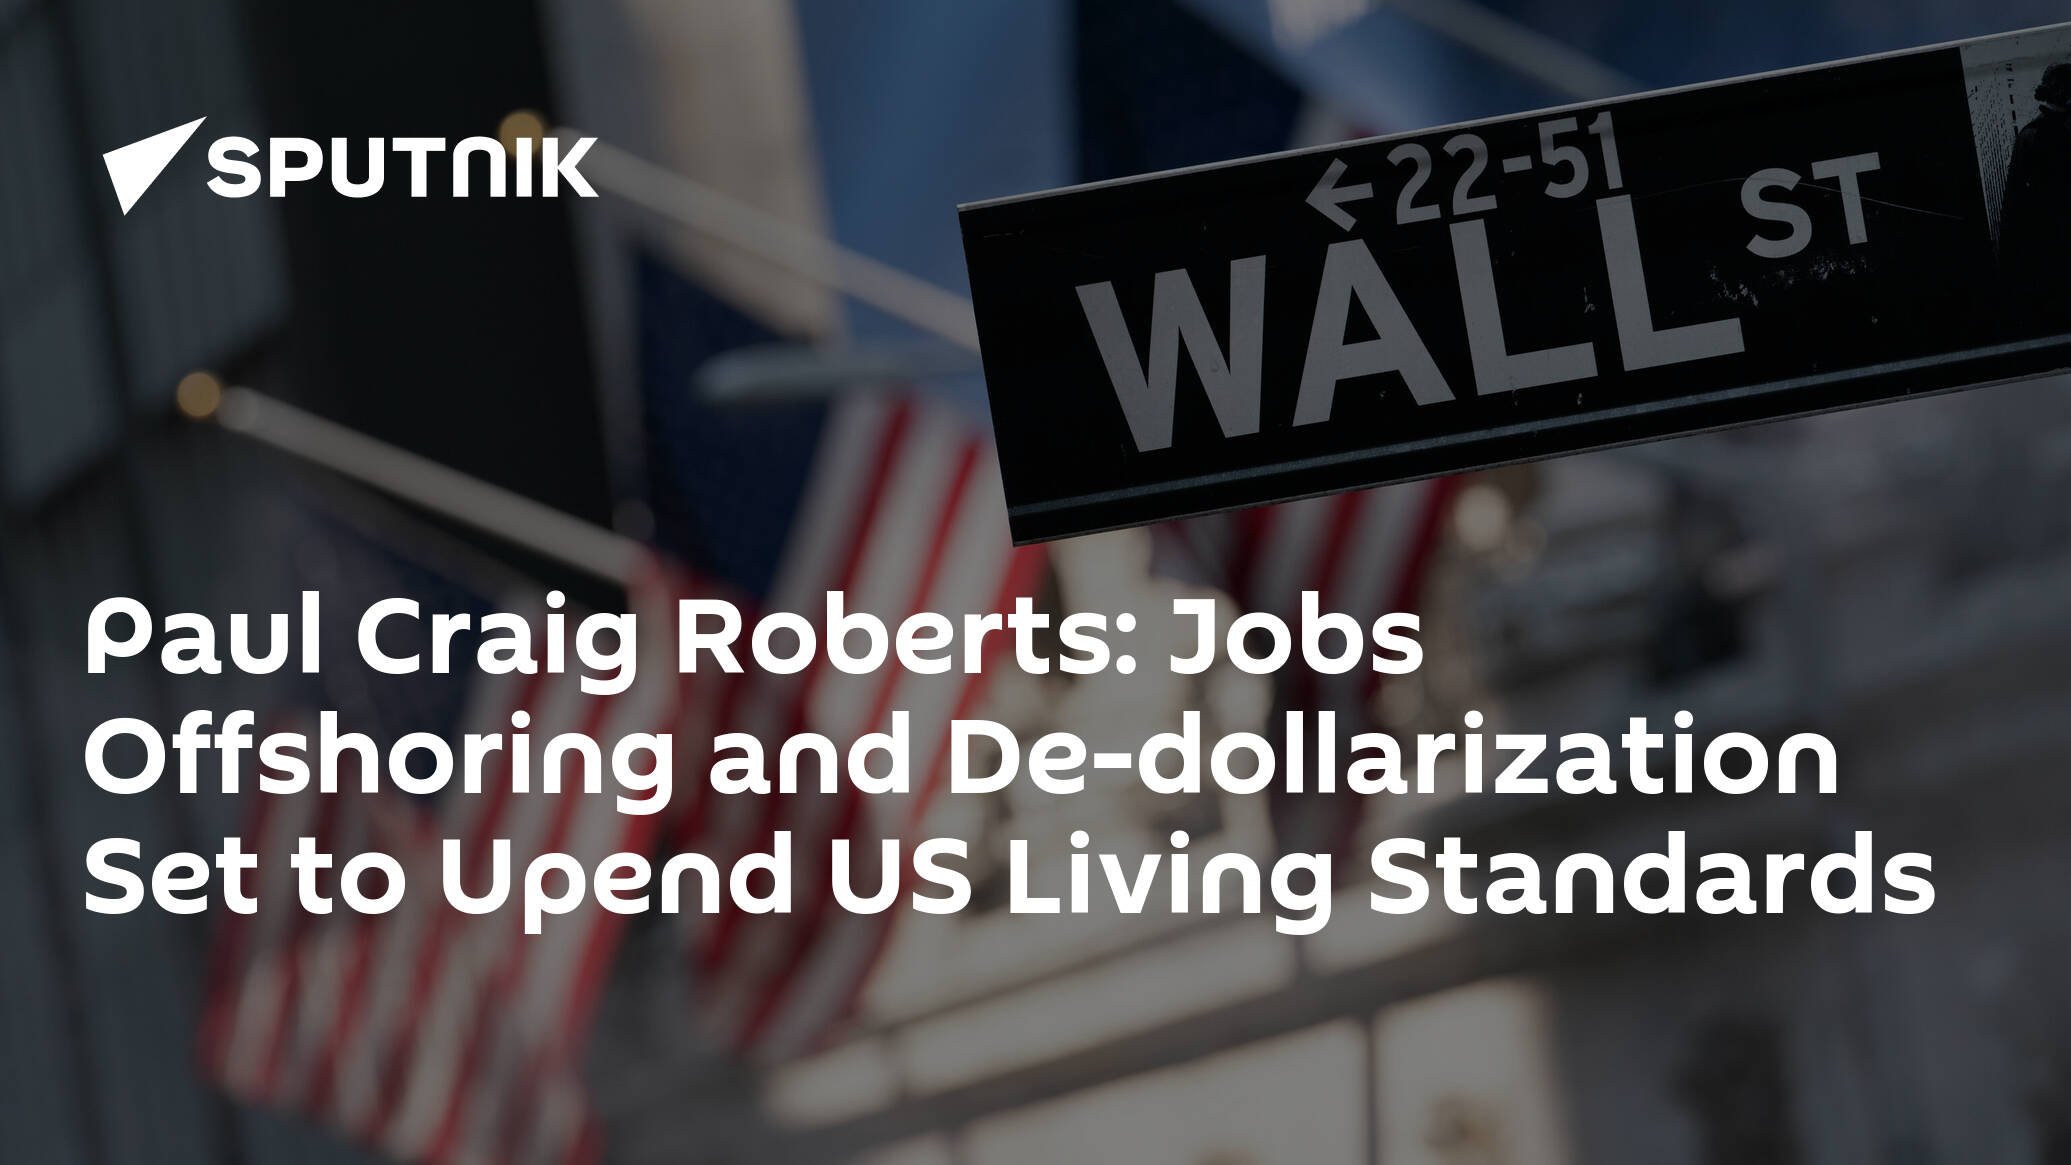 Paul Craig Roberts: Jobs Offshoring and De-dollarization Set to Upend US Living Standards